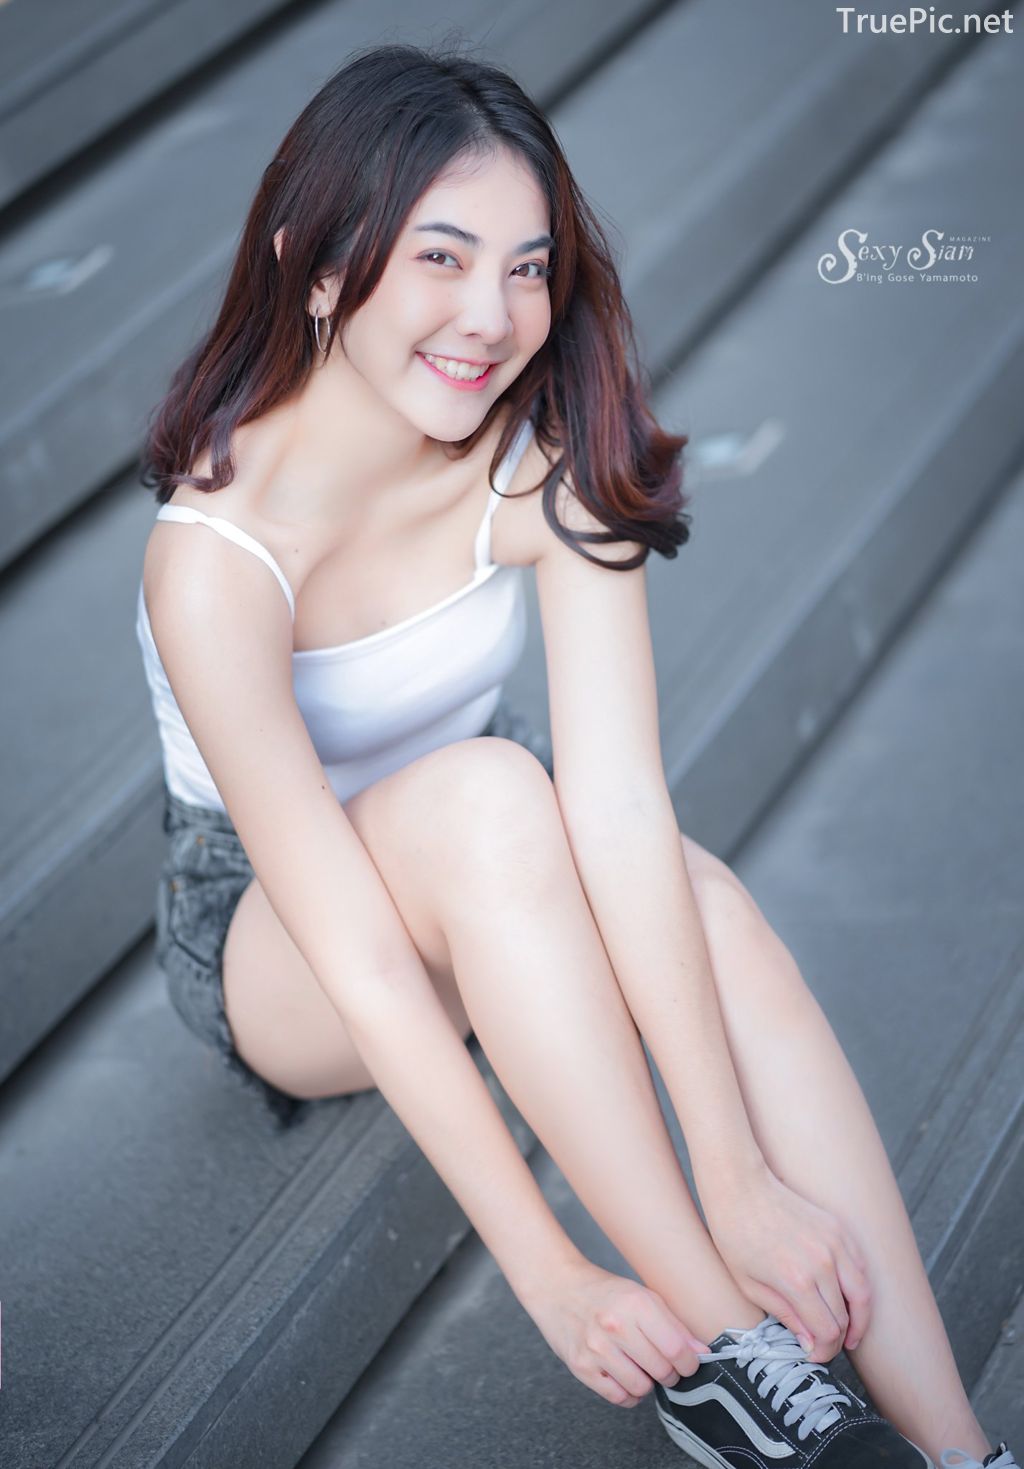 Thailand beautifil girl - Wannapon Thongkayai - The Angel on the City Street - TruePic.net - Picture 29